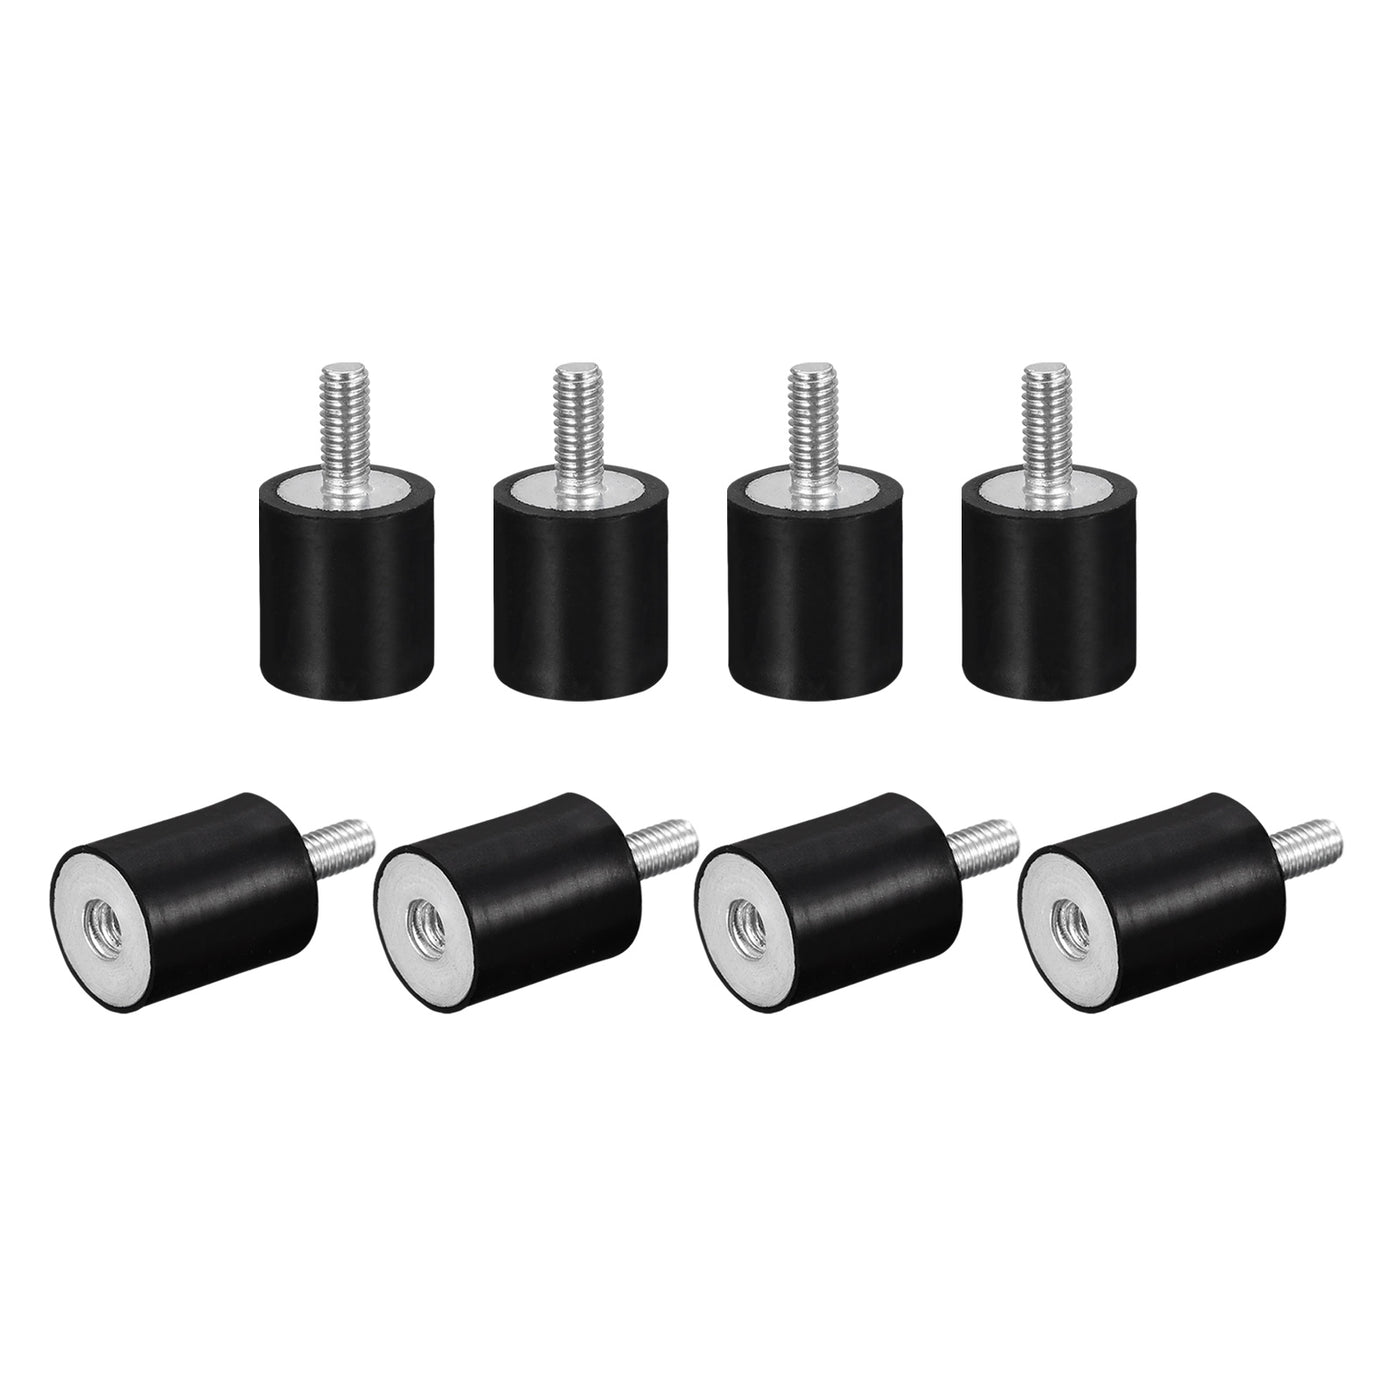 uxcell Uxcell Rubber Mount 8pcs M4 Male/Female Vibration Isolator Shock Absorber, D15mmxH20mm